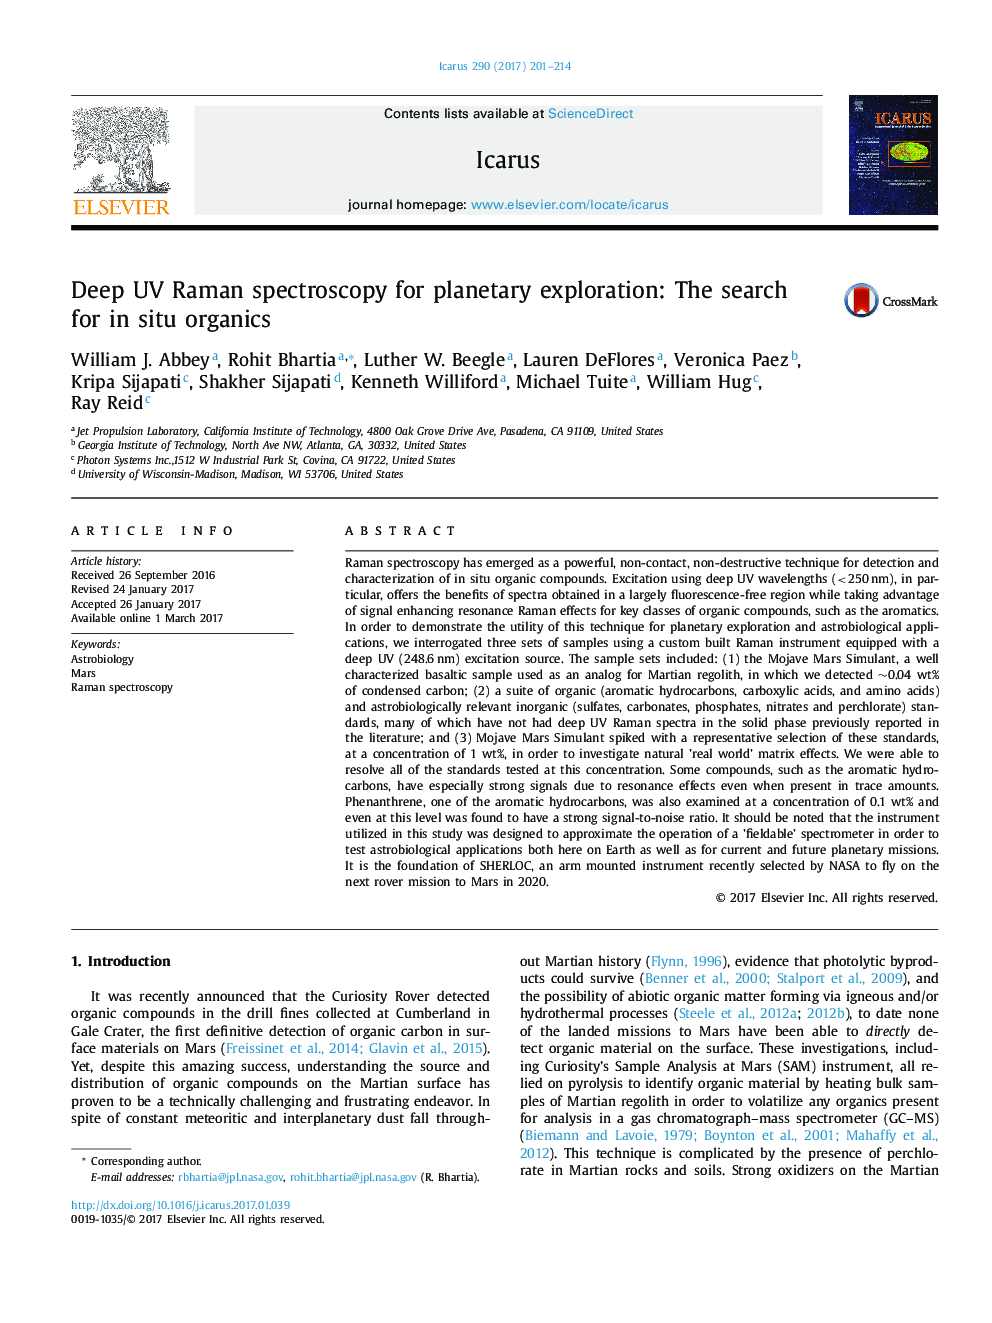 Deep UV Raman spectroscopy for planetary exploration: The search for in situ organics